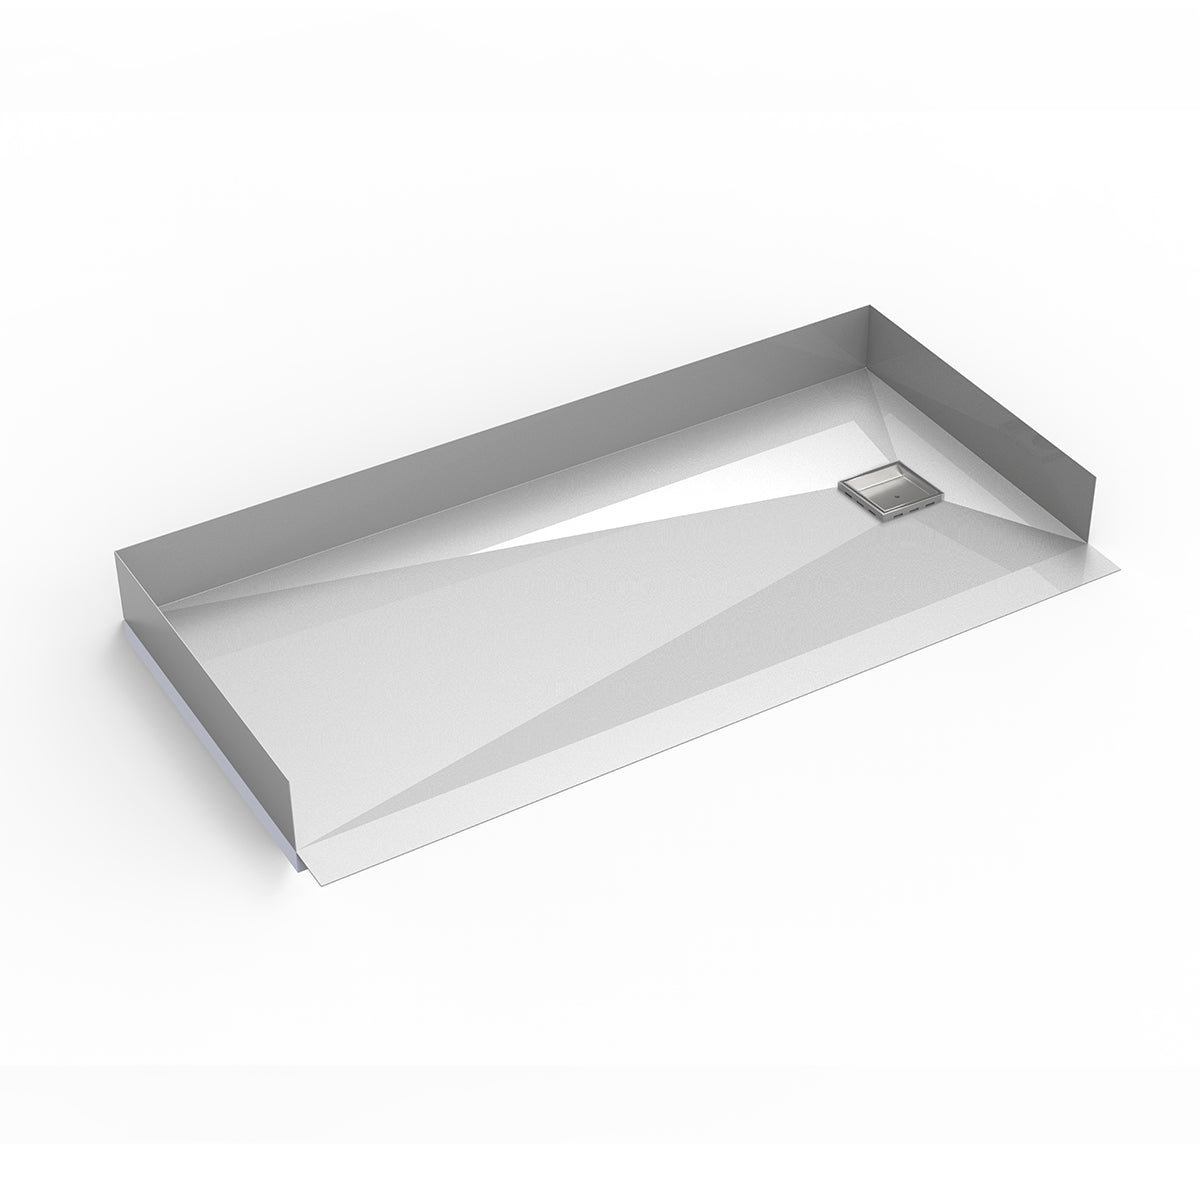 Infinity Drain 30"x 60" Curbless Stainless Steel Shower Base with Tile Insert Right Drain location